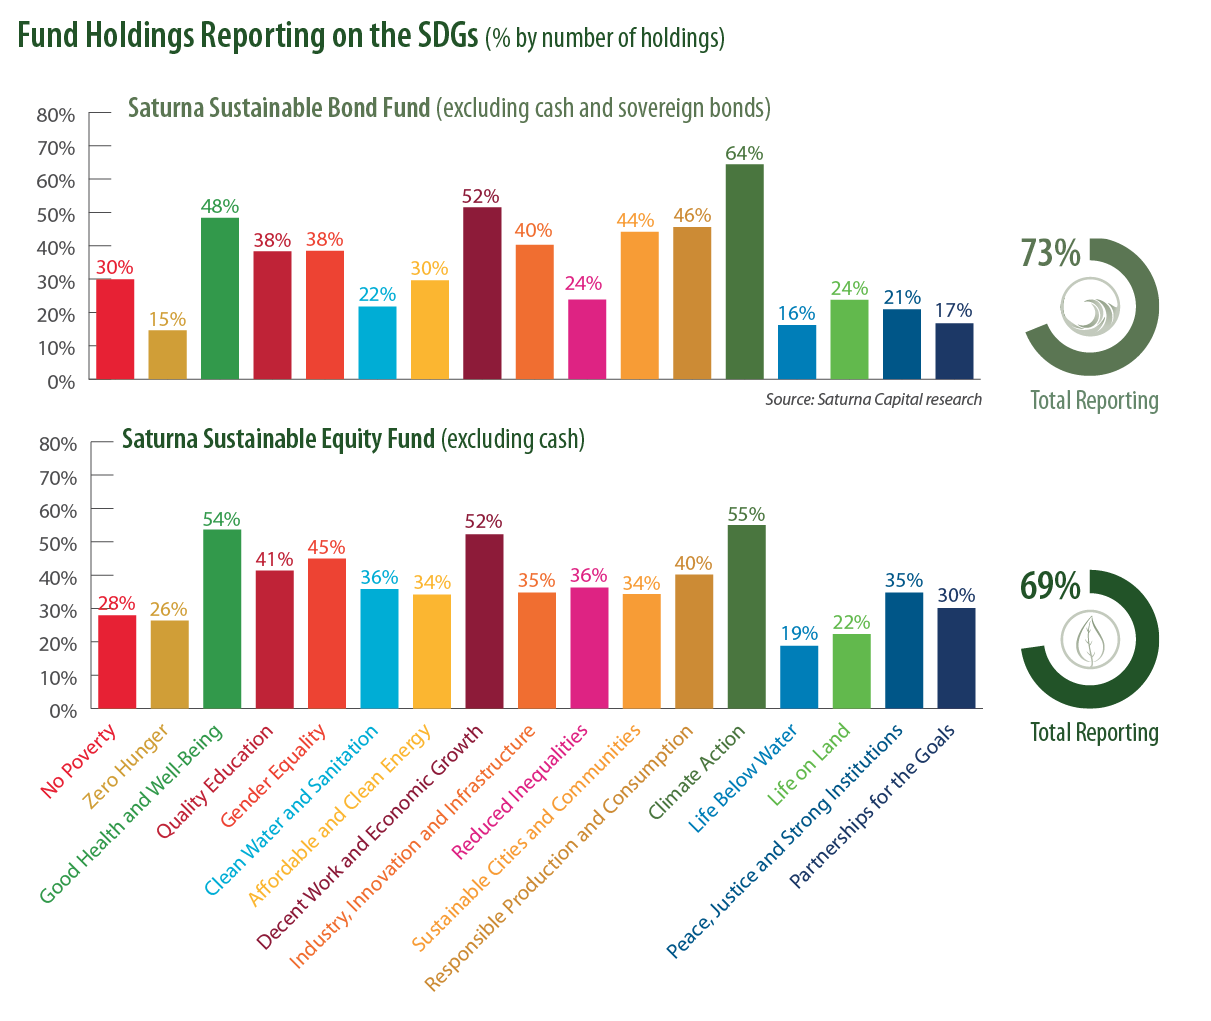 SDG Reporting By Fund